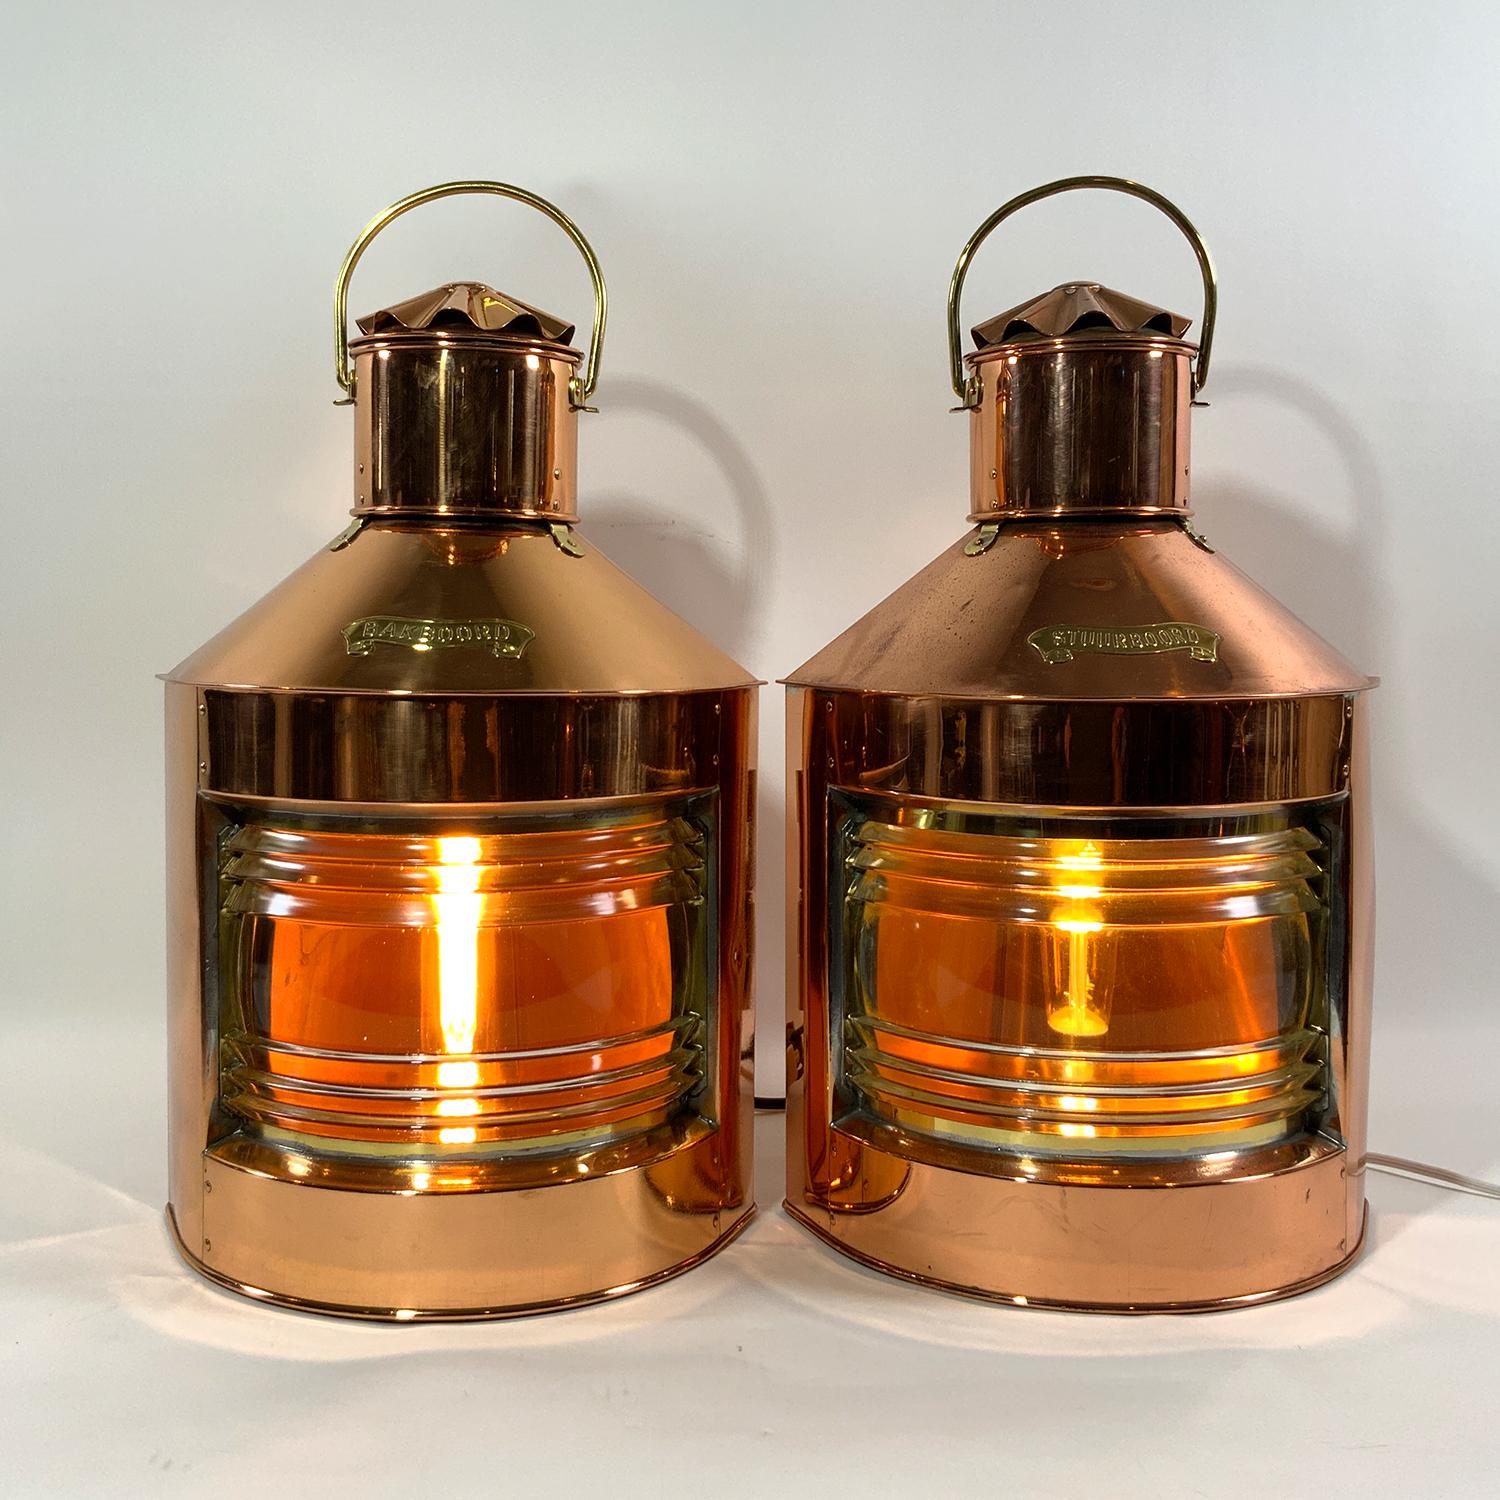 Highly polished ships lanterns with Fresnel glass lenses. Vented tops with fluted chimney and brass carry handles. Fitted with brass 